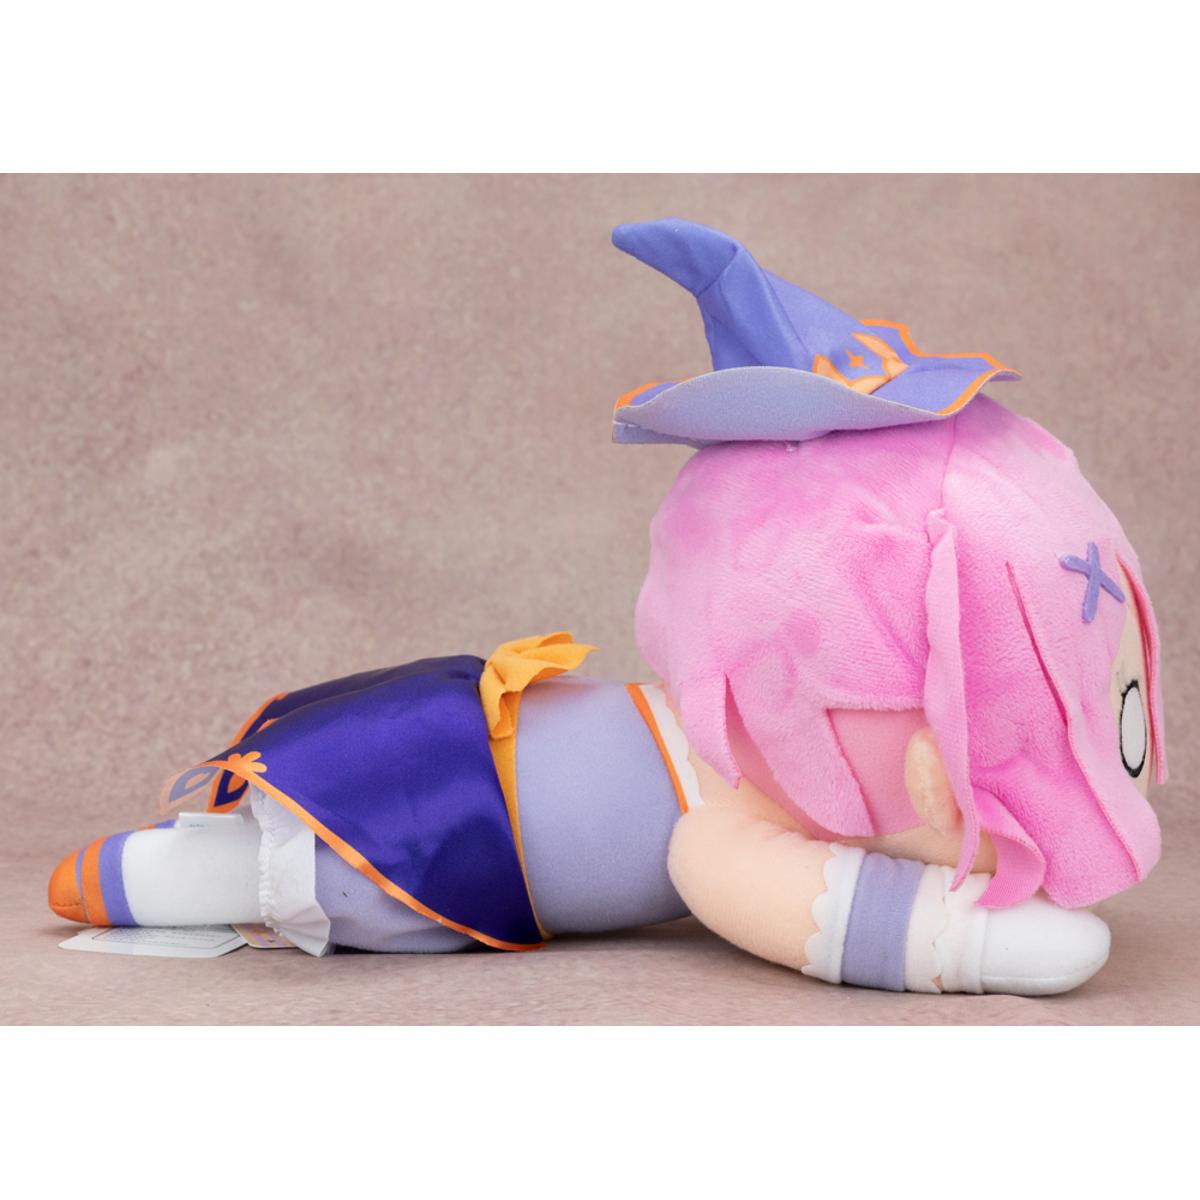 Re:Zero -Starting Life in Another World- SP Lay-Down Plush "Ram" "Little Witching Mischiefs" B: Ram (Hmpf!) Super Anime Store 